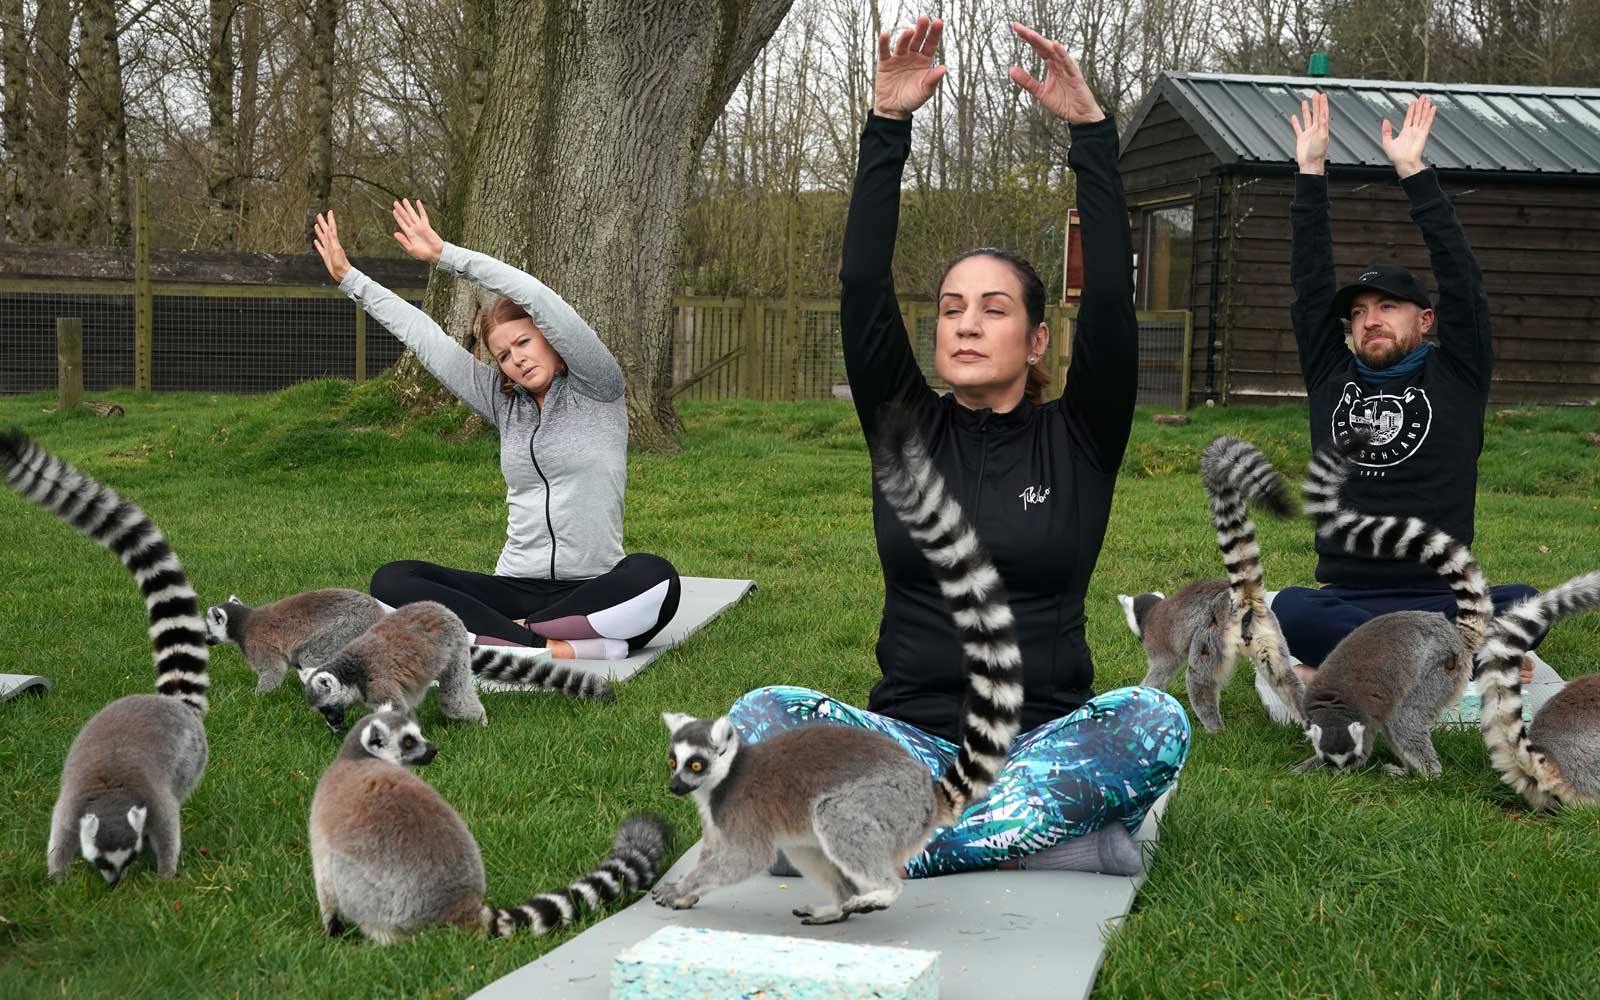 Armathwaite Hall hotel in Keswick, Cumbria holds Lemoga classes with the lemurs from Lake District Wild Life Park mingling with the class to create a personal yoga experience which aims to heighten the sense of wellbeing for both lemur and human. (Photo by Owen Humphreys/PA Images via Getty Images)